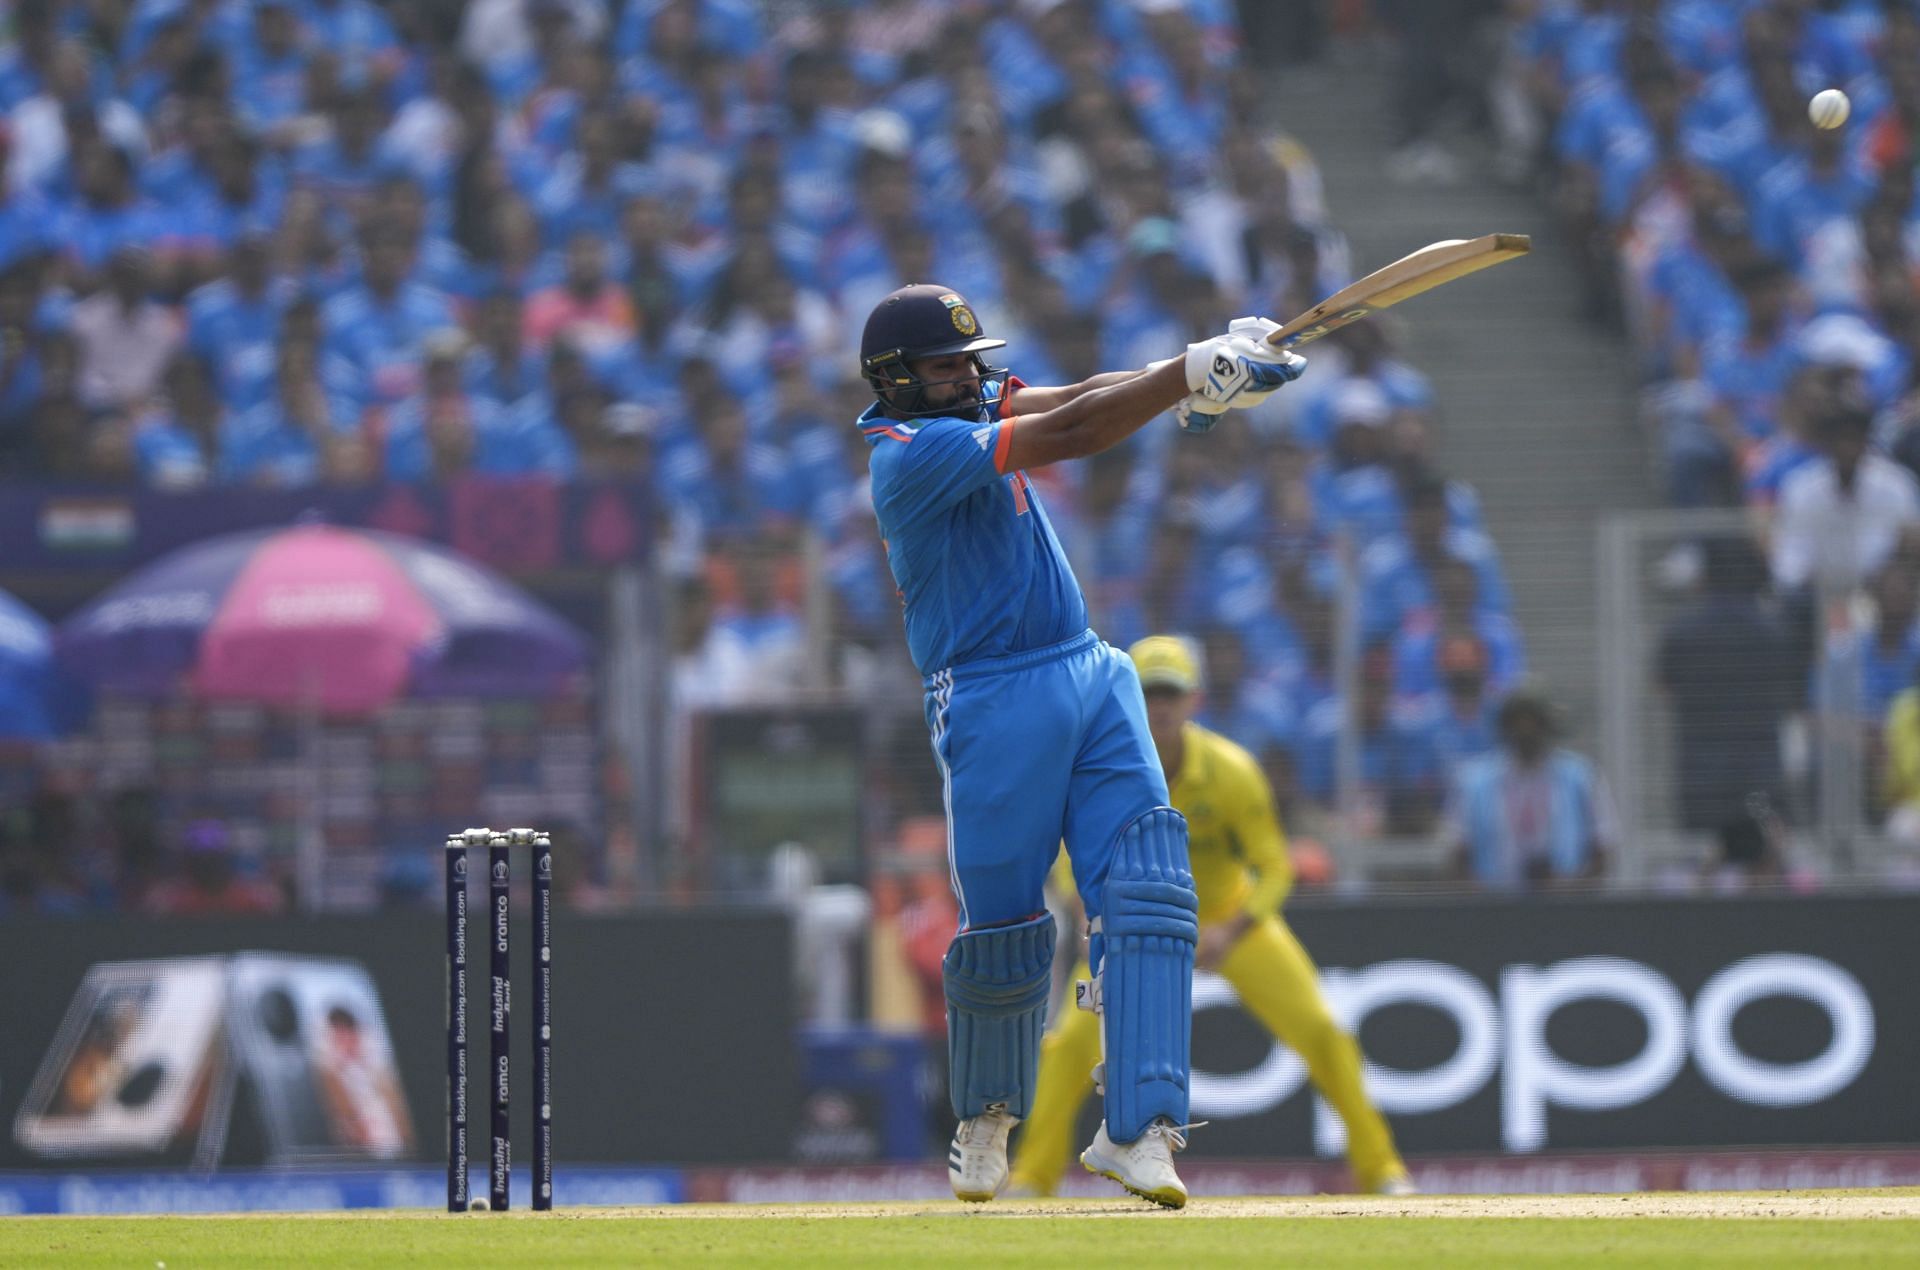 Rohit Sharma smashed four fours and three sixes during his innings. [P/C: AP]